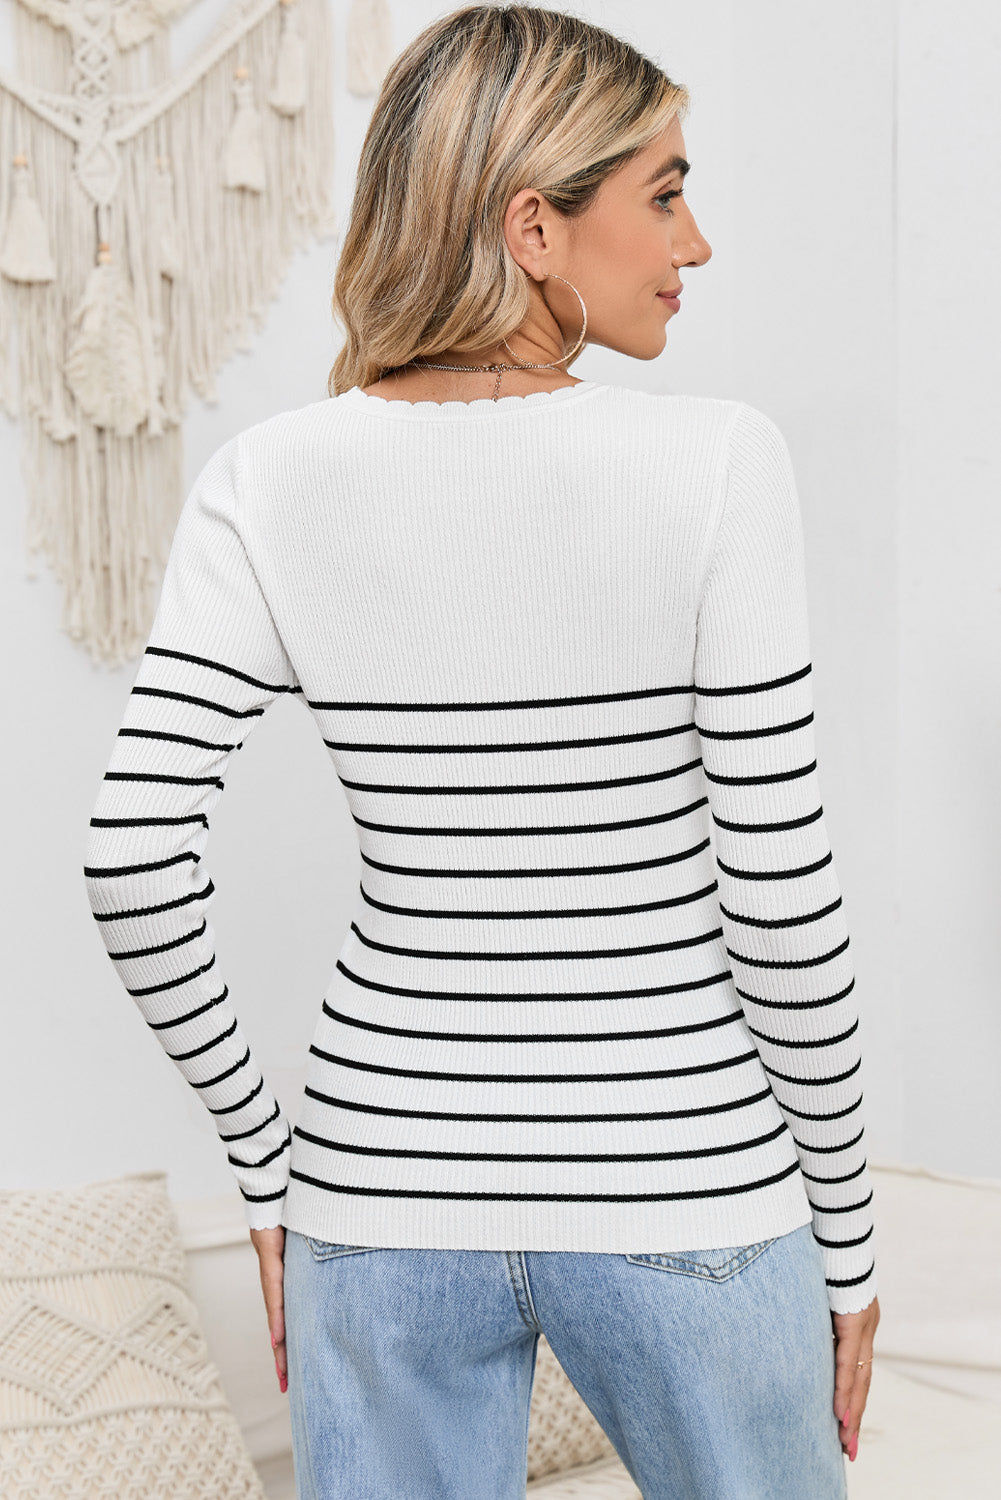 Striped Round Neck Long Sleeve Knit Top - Guy Christopher 